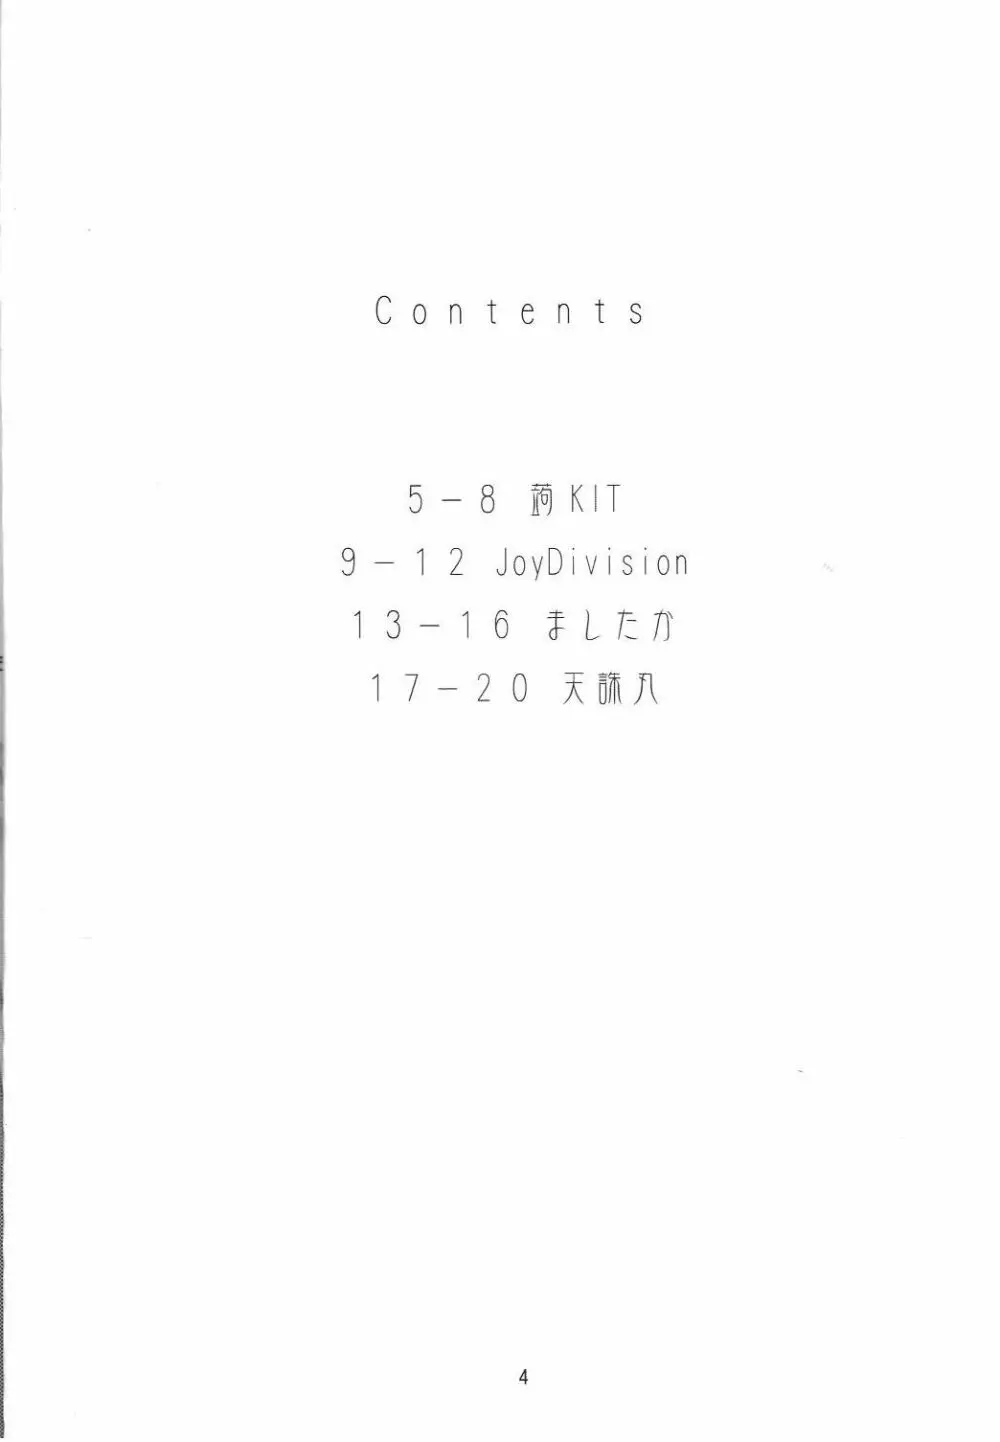 The collection of joint BOOK 3ページ